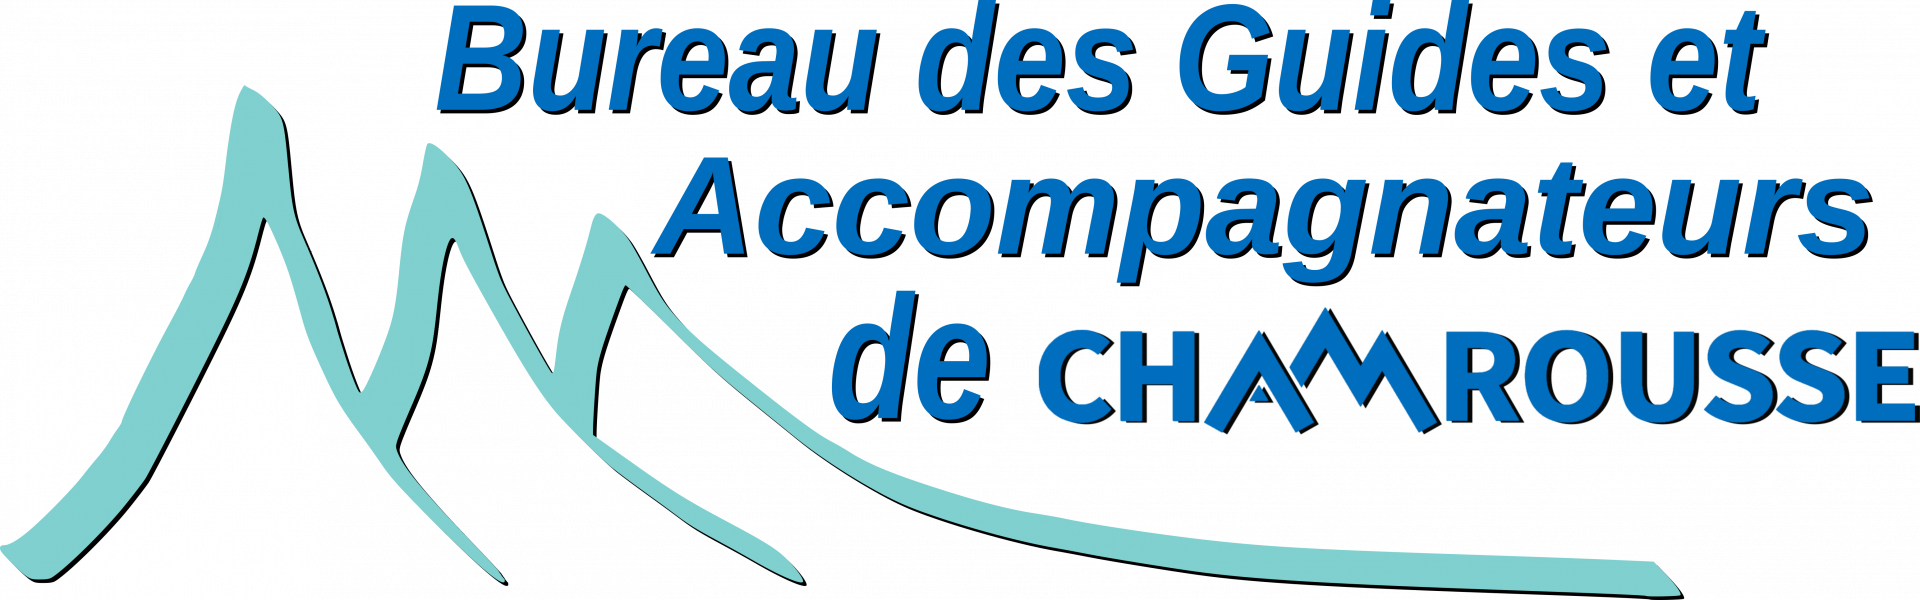 Chamrousse tour guides office's logo